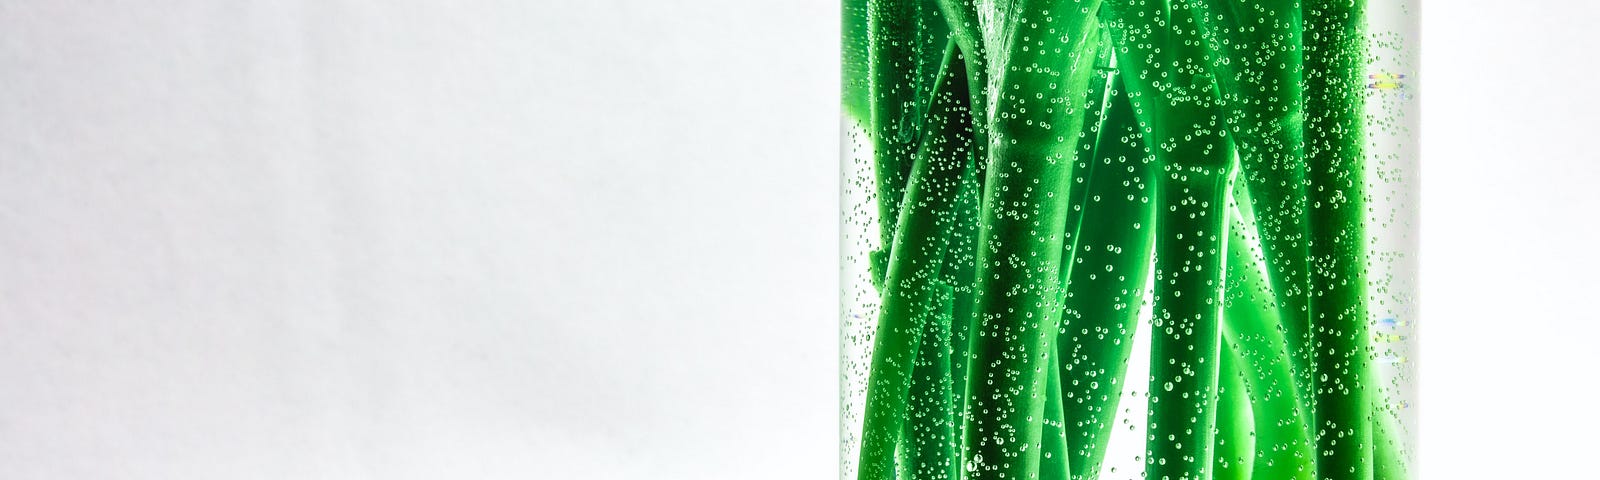 Green stems in a water glass